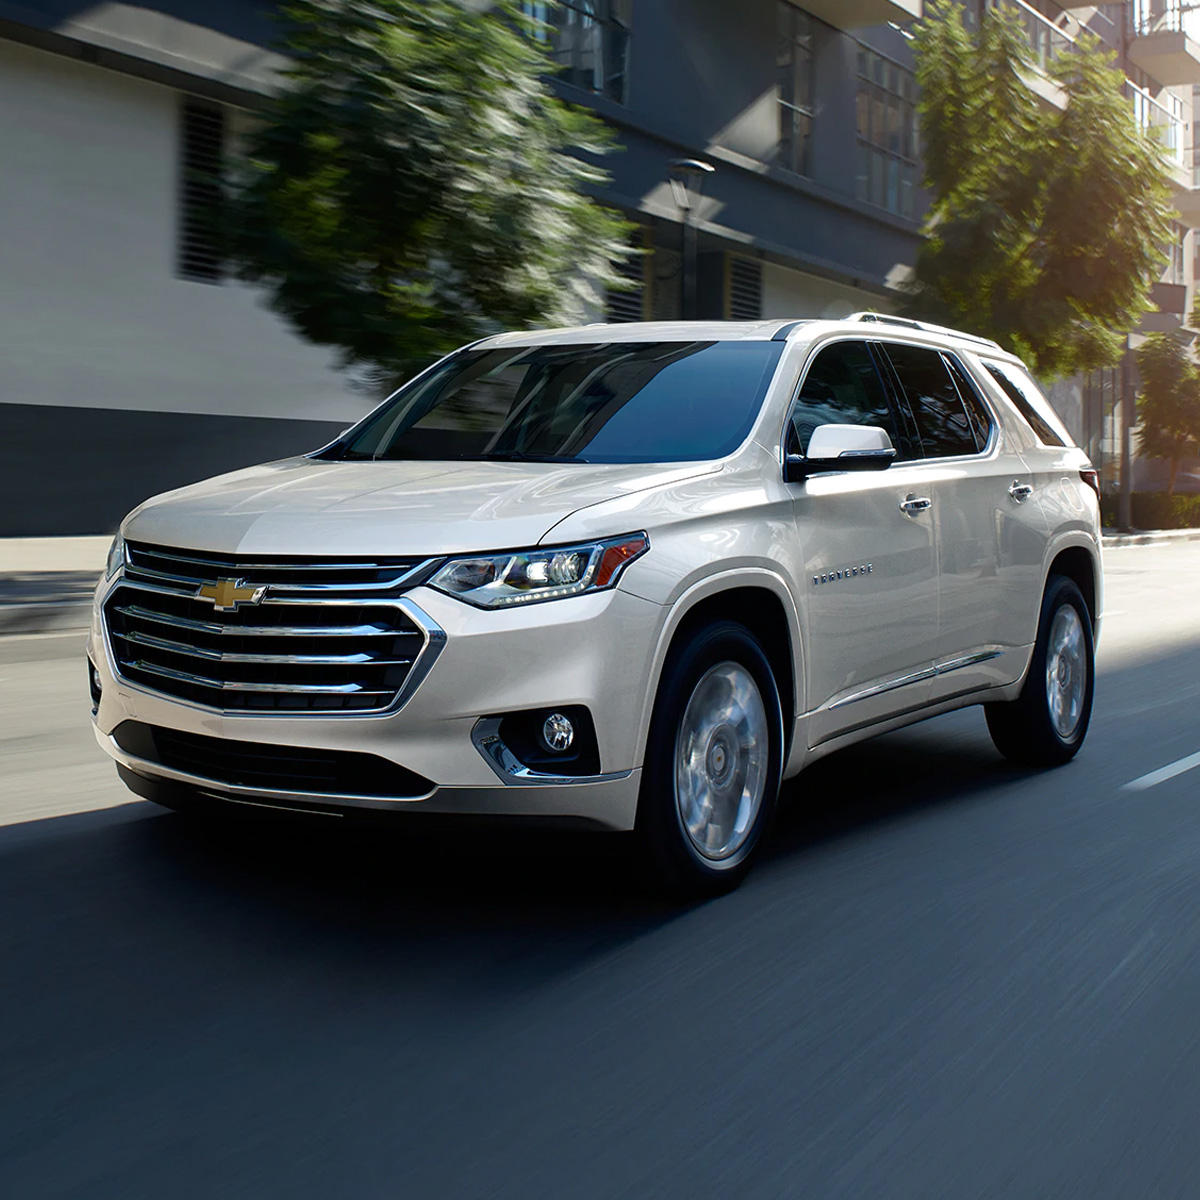 THE 2021 CHEVY TRAVERSE